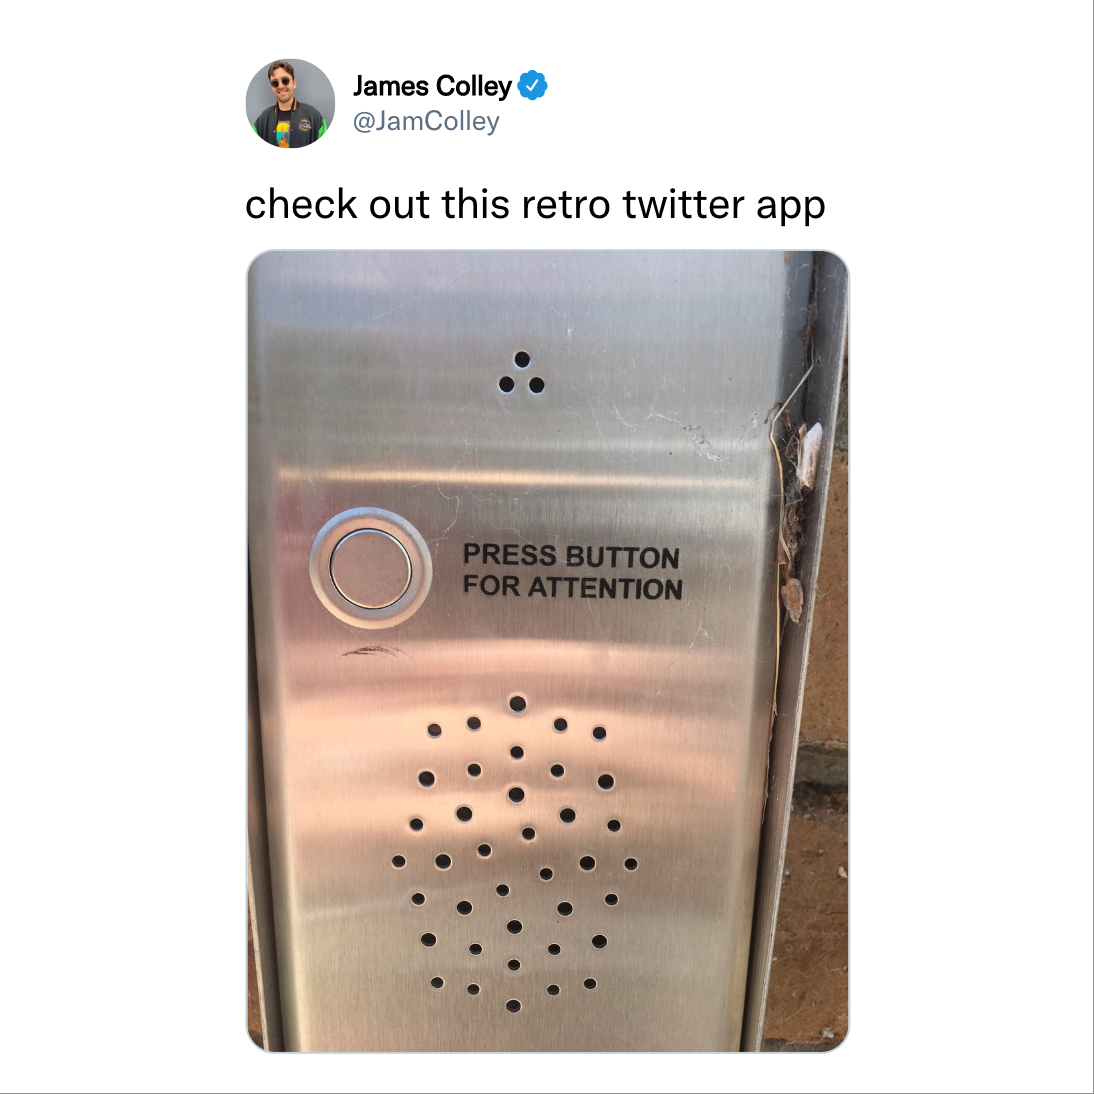 funny tweets - need attention button - James Colley check out this retro twitter app Press Button For Attention